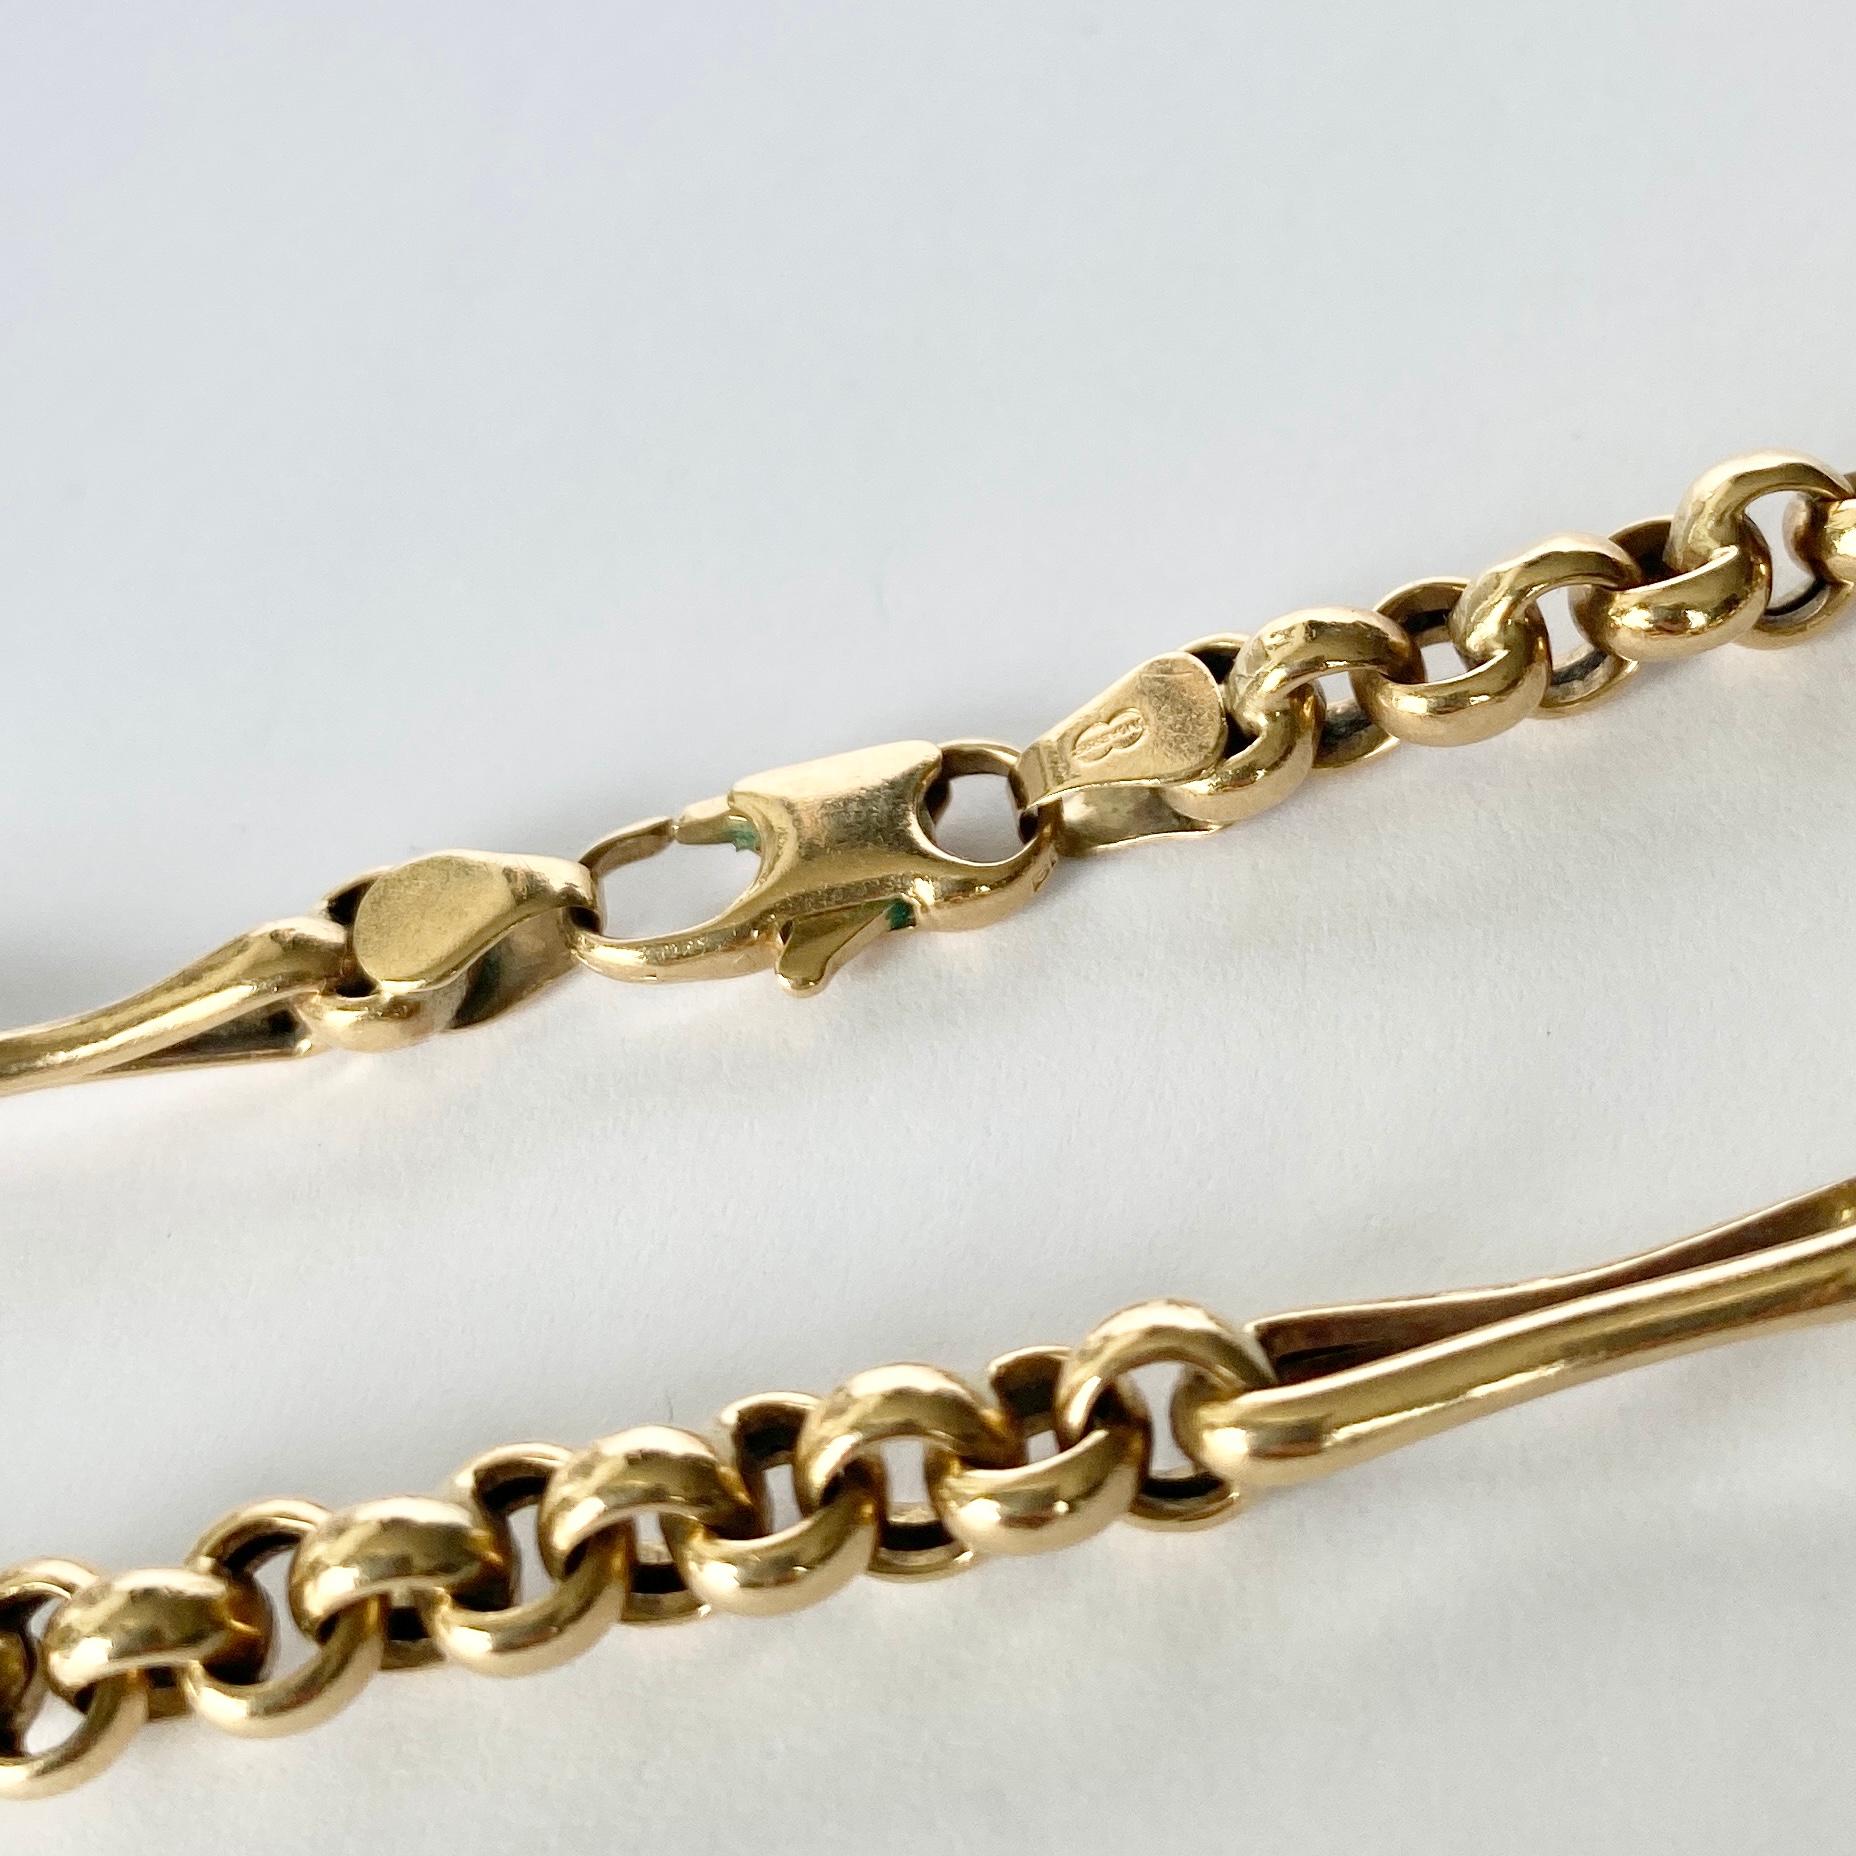 This gorgeous bracelet is modelled in 9carat gold. One of the styles resembles the trombone link and the other is a belcher chain.

Length: 19cm 
Width: 5mm 

Weight: 5.6g